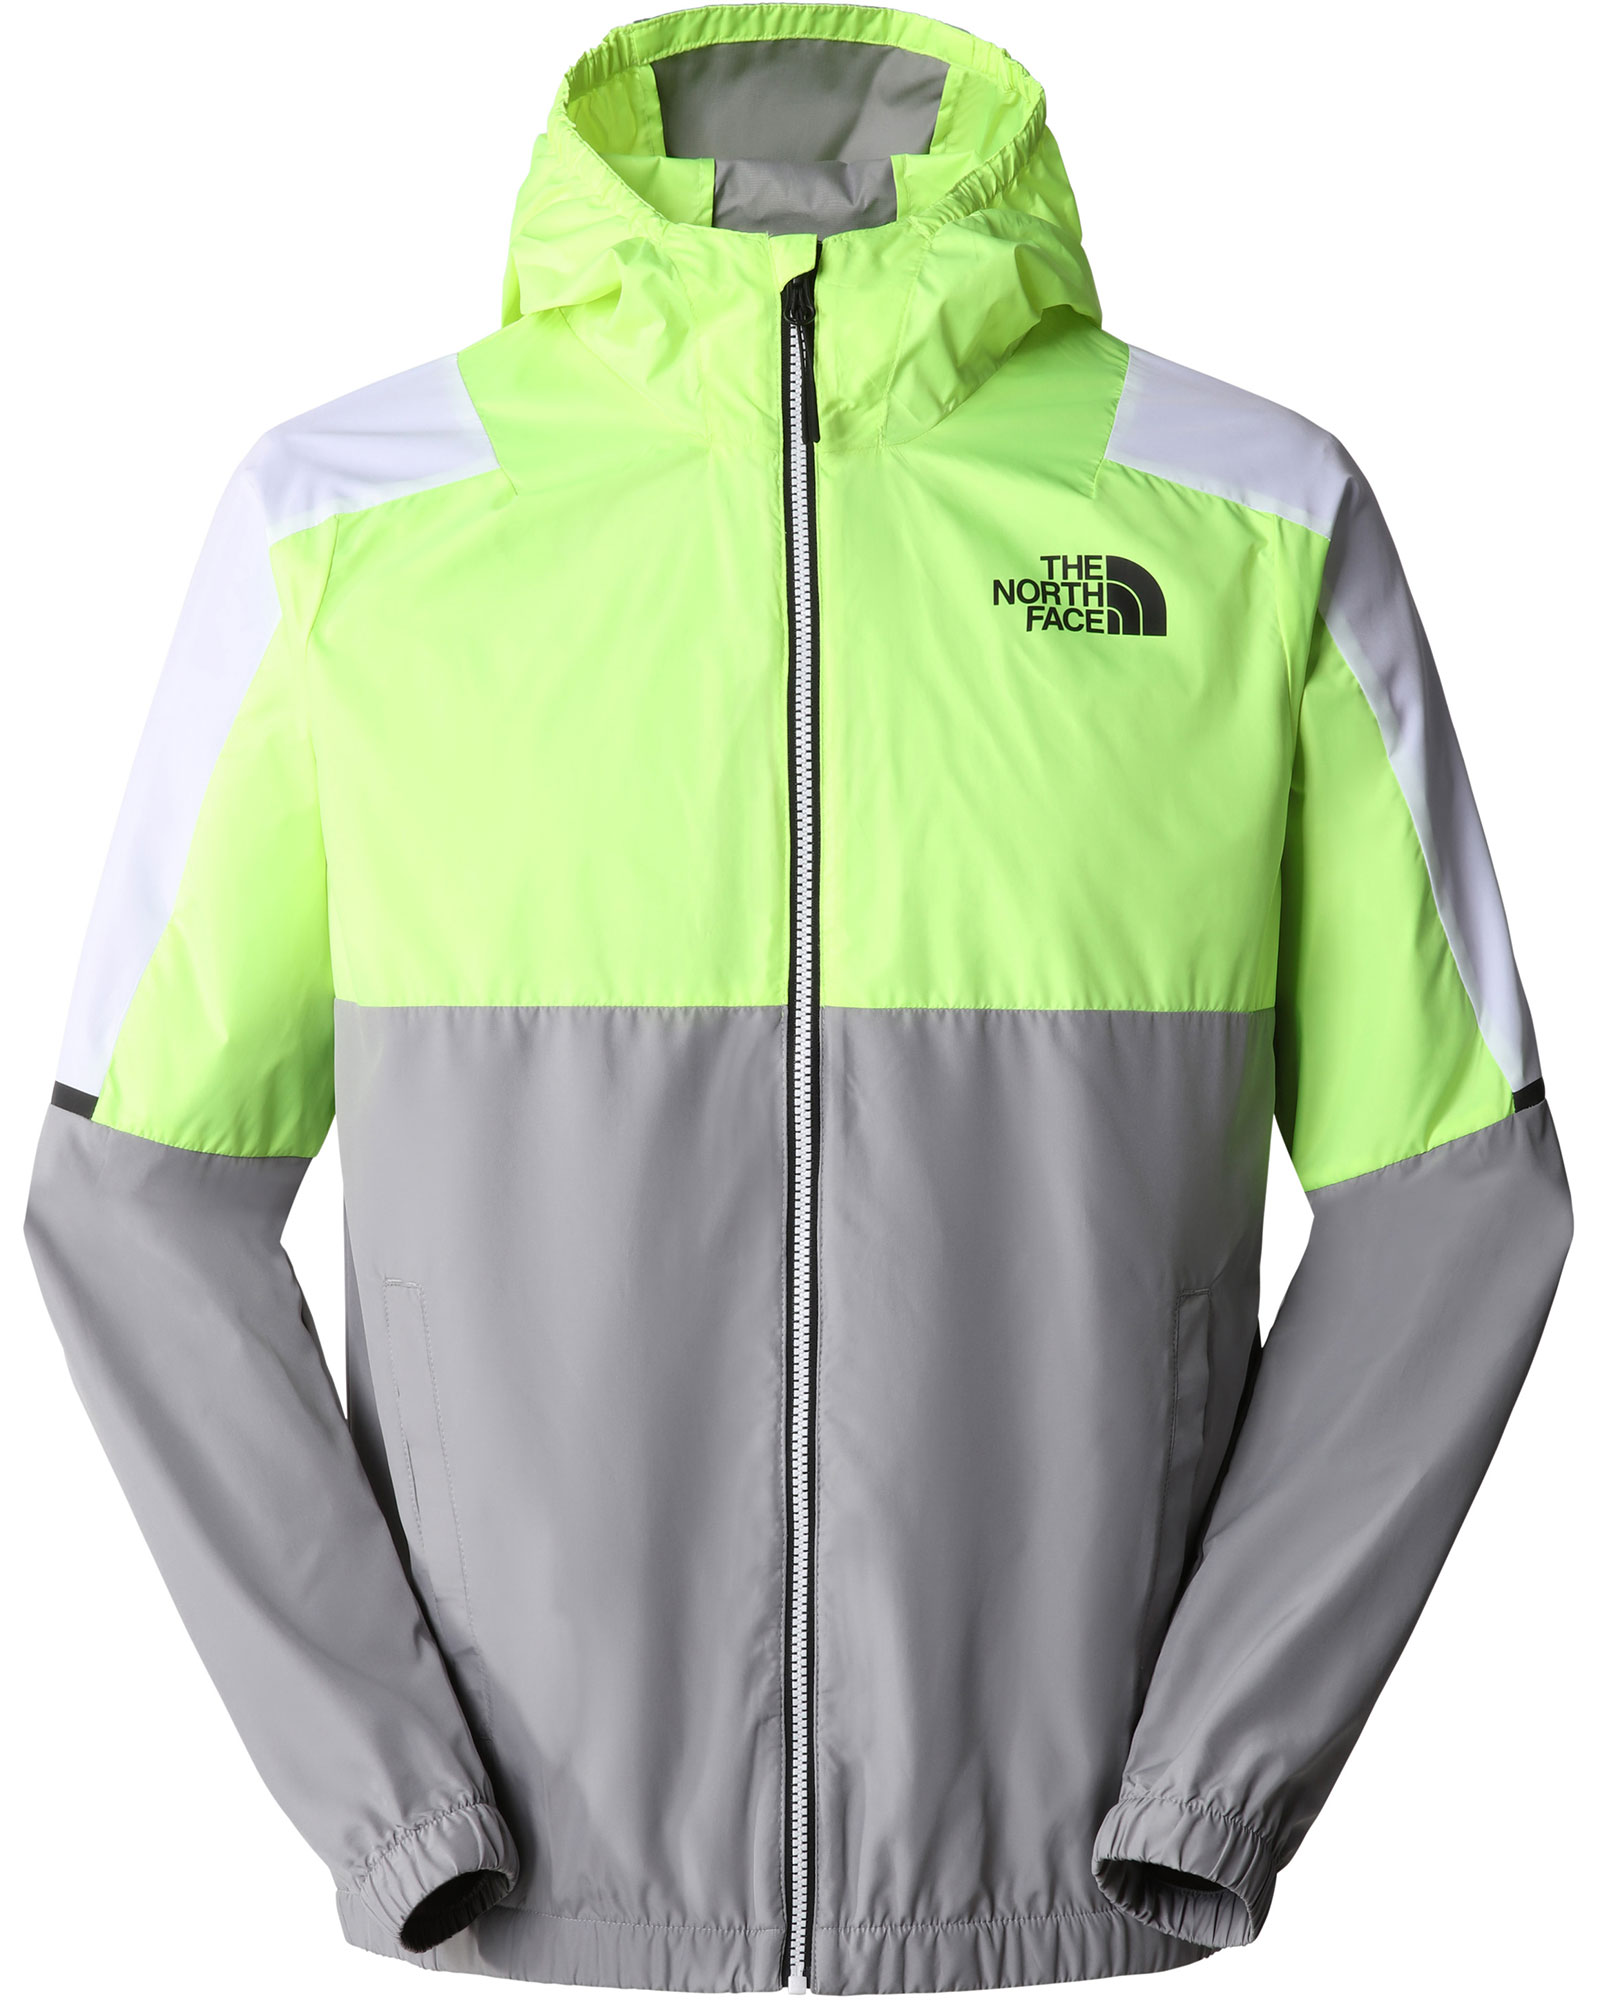 The North Face Men’s MA Wind Full Zip Jacket - Meld Grey/LED Yellow XS